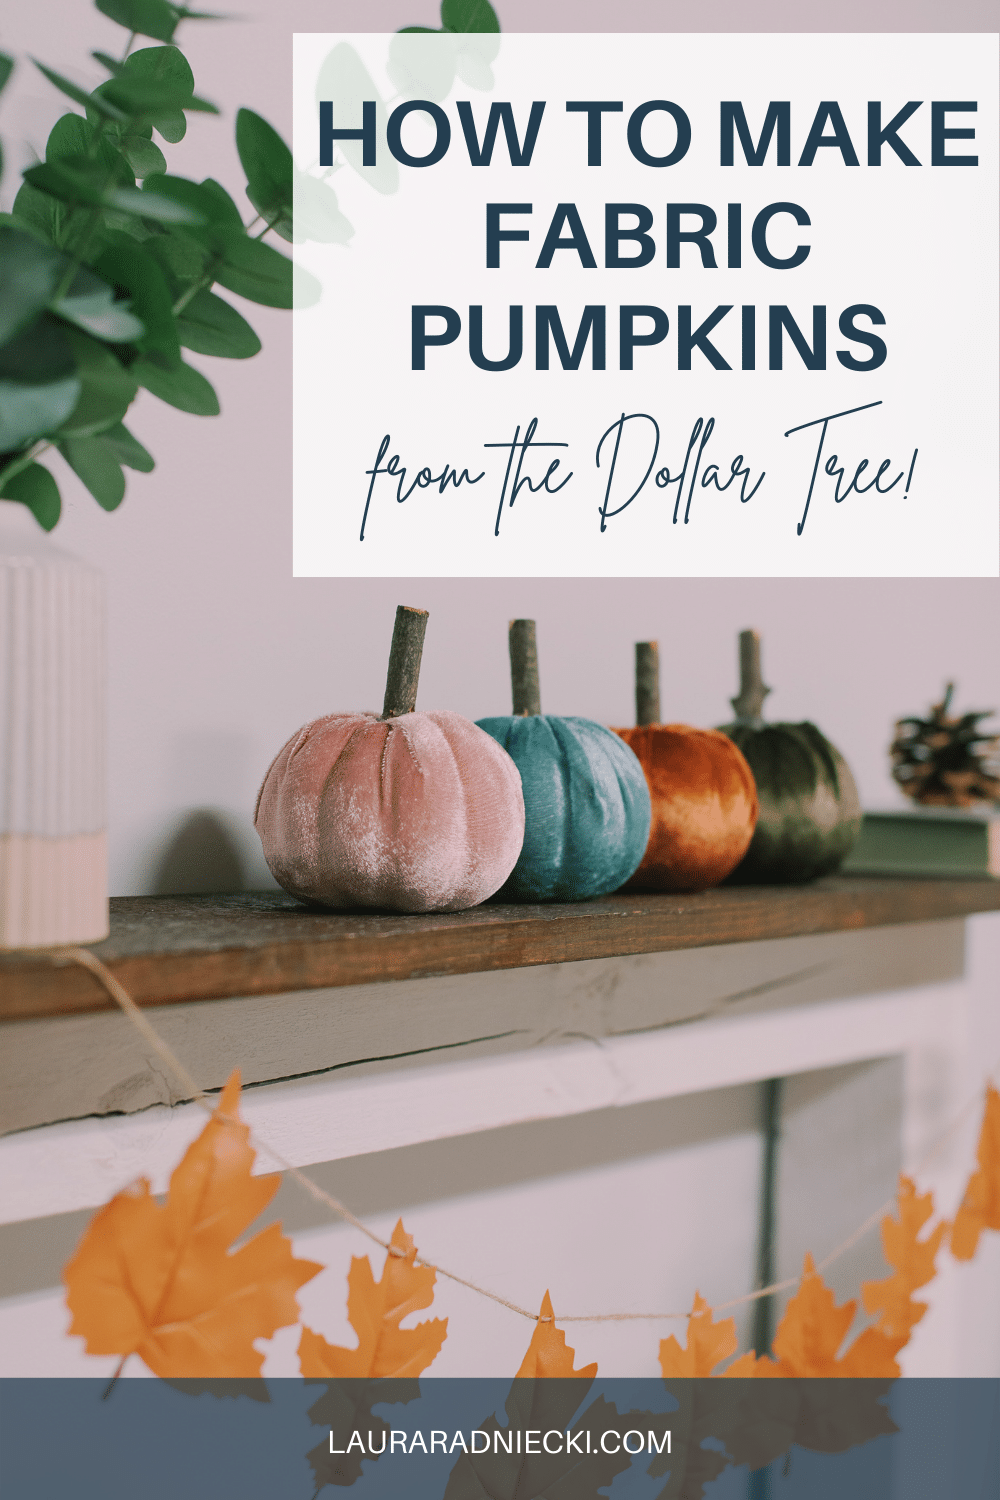 How to make fabric pumpkins from the dollar store with Laura Radniecki